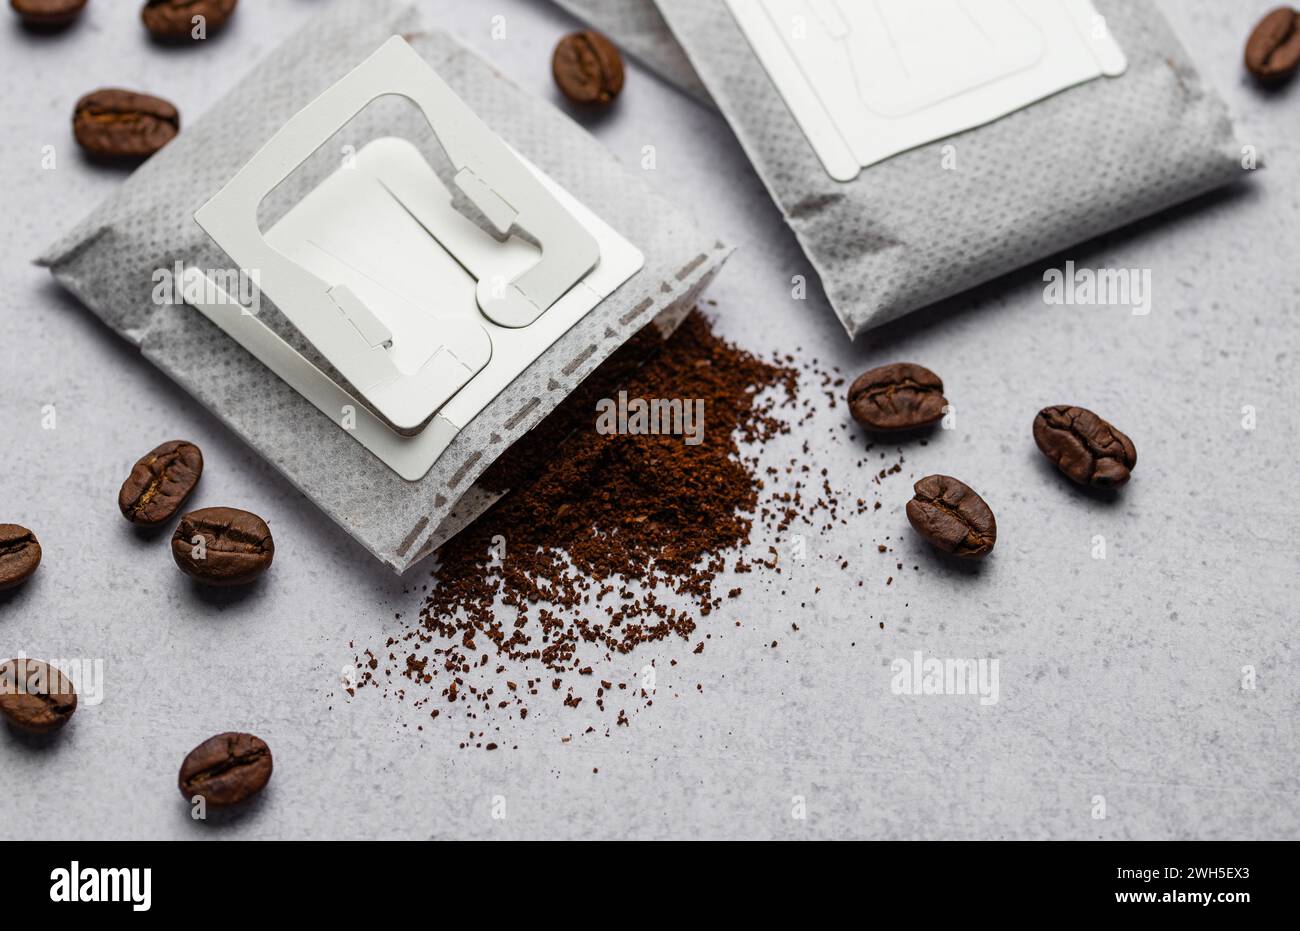 Drip coffee paper bags with coffee beans on a grey concrete background Stock Photo